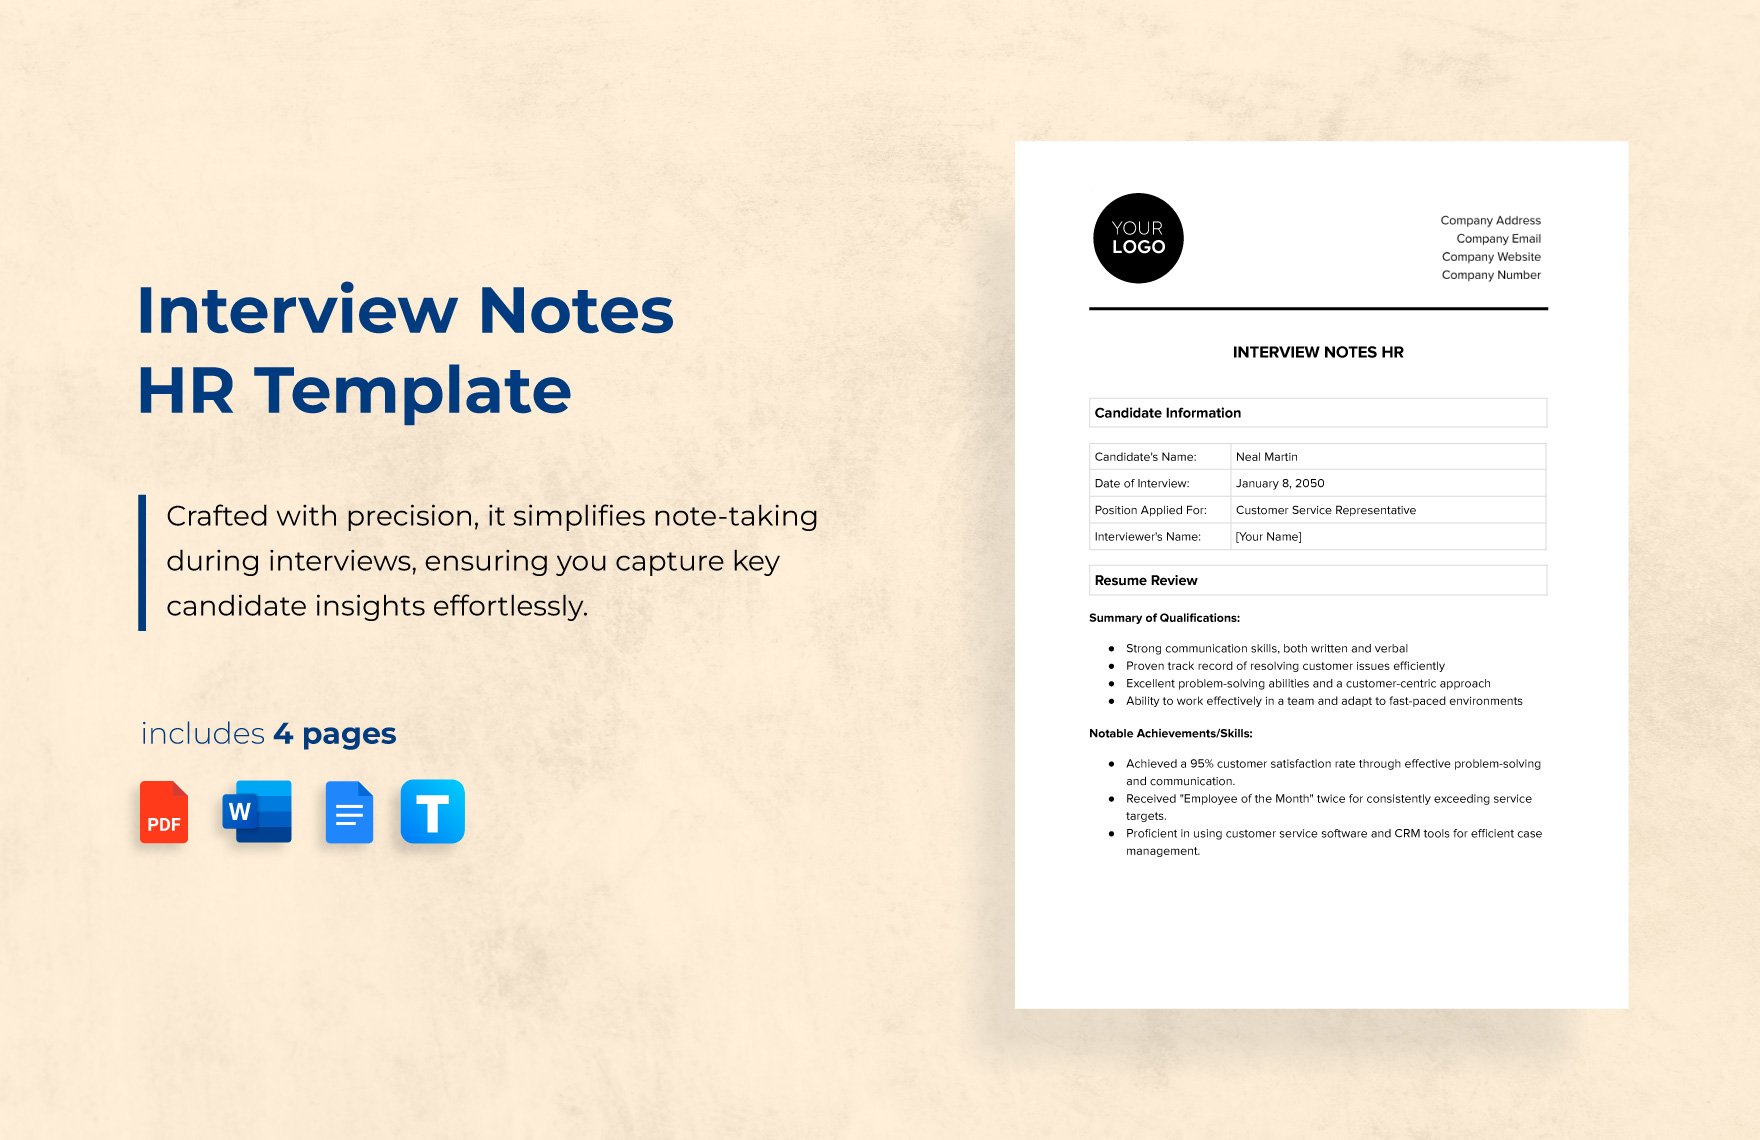 Interview Notes HR Template